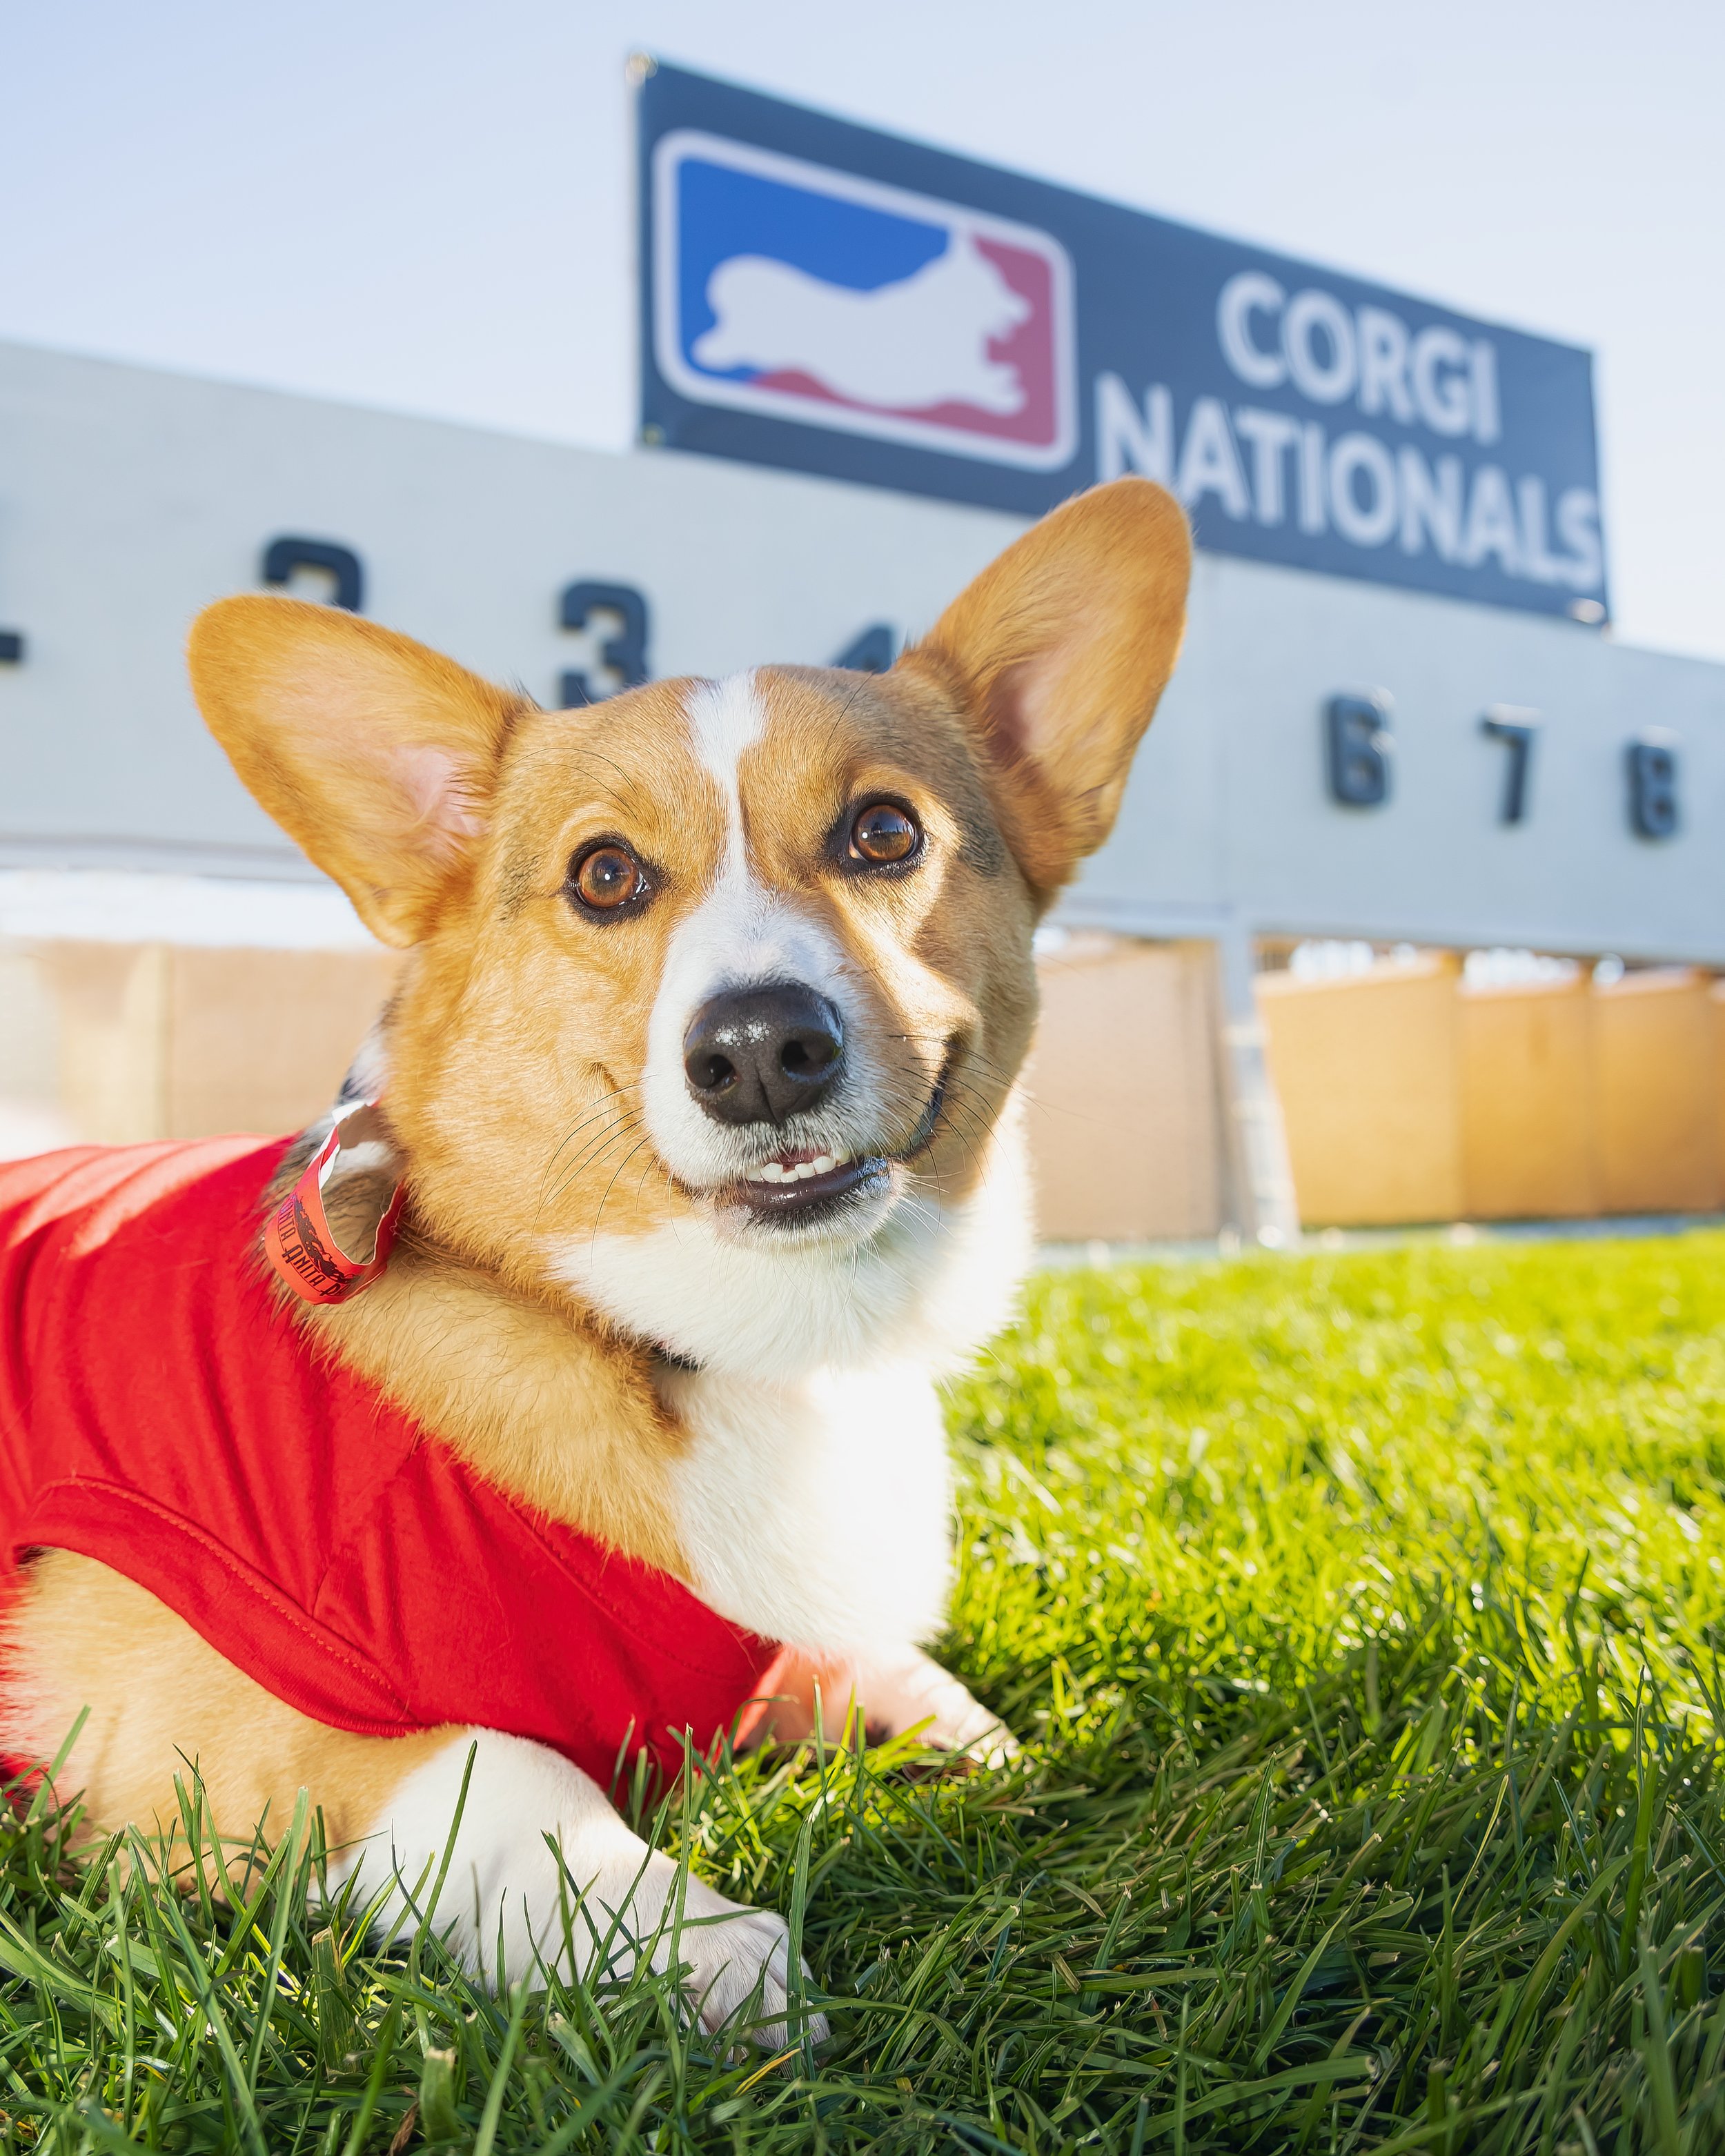 Red Corgi Smiling With National Sign.jpg